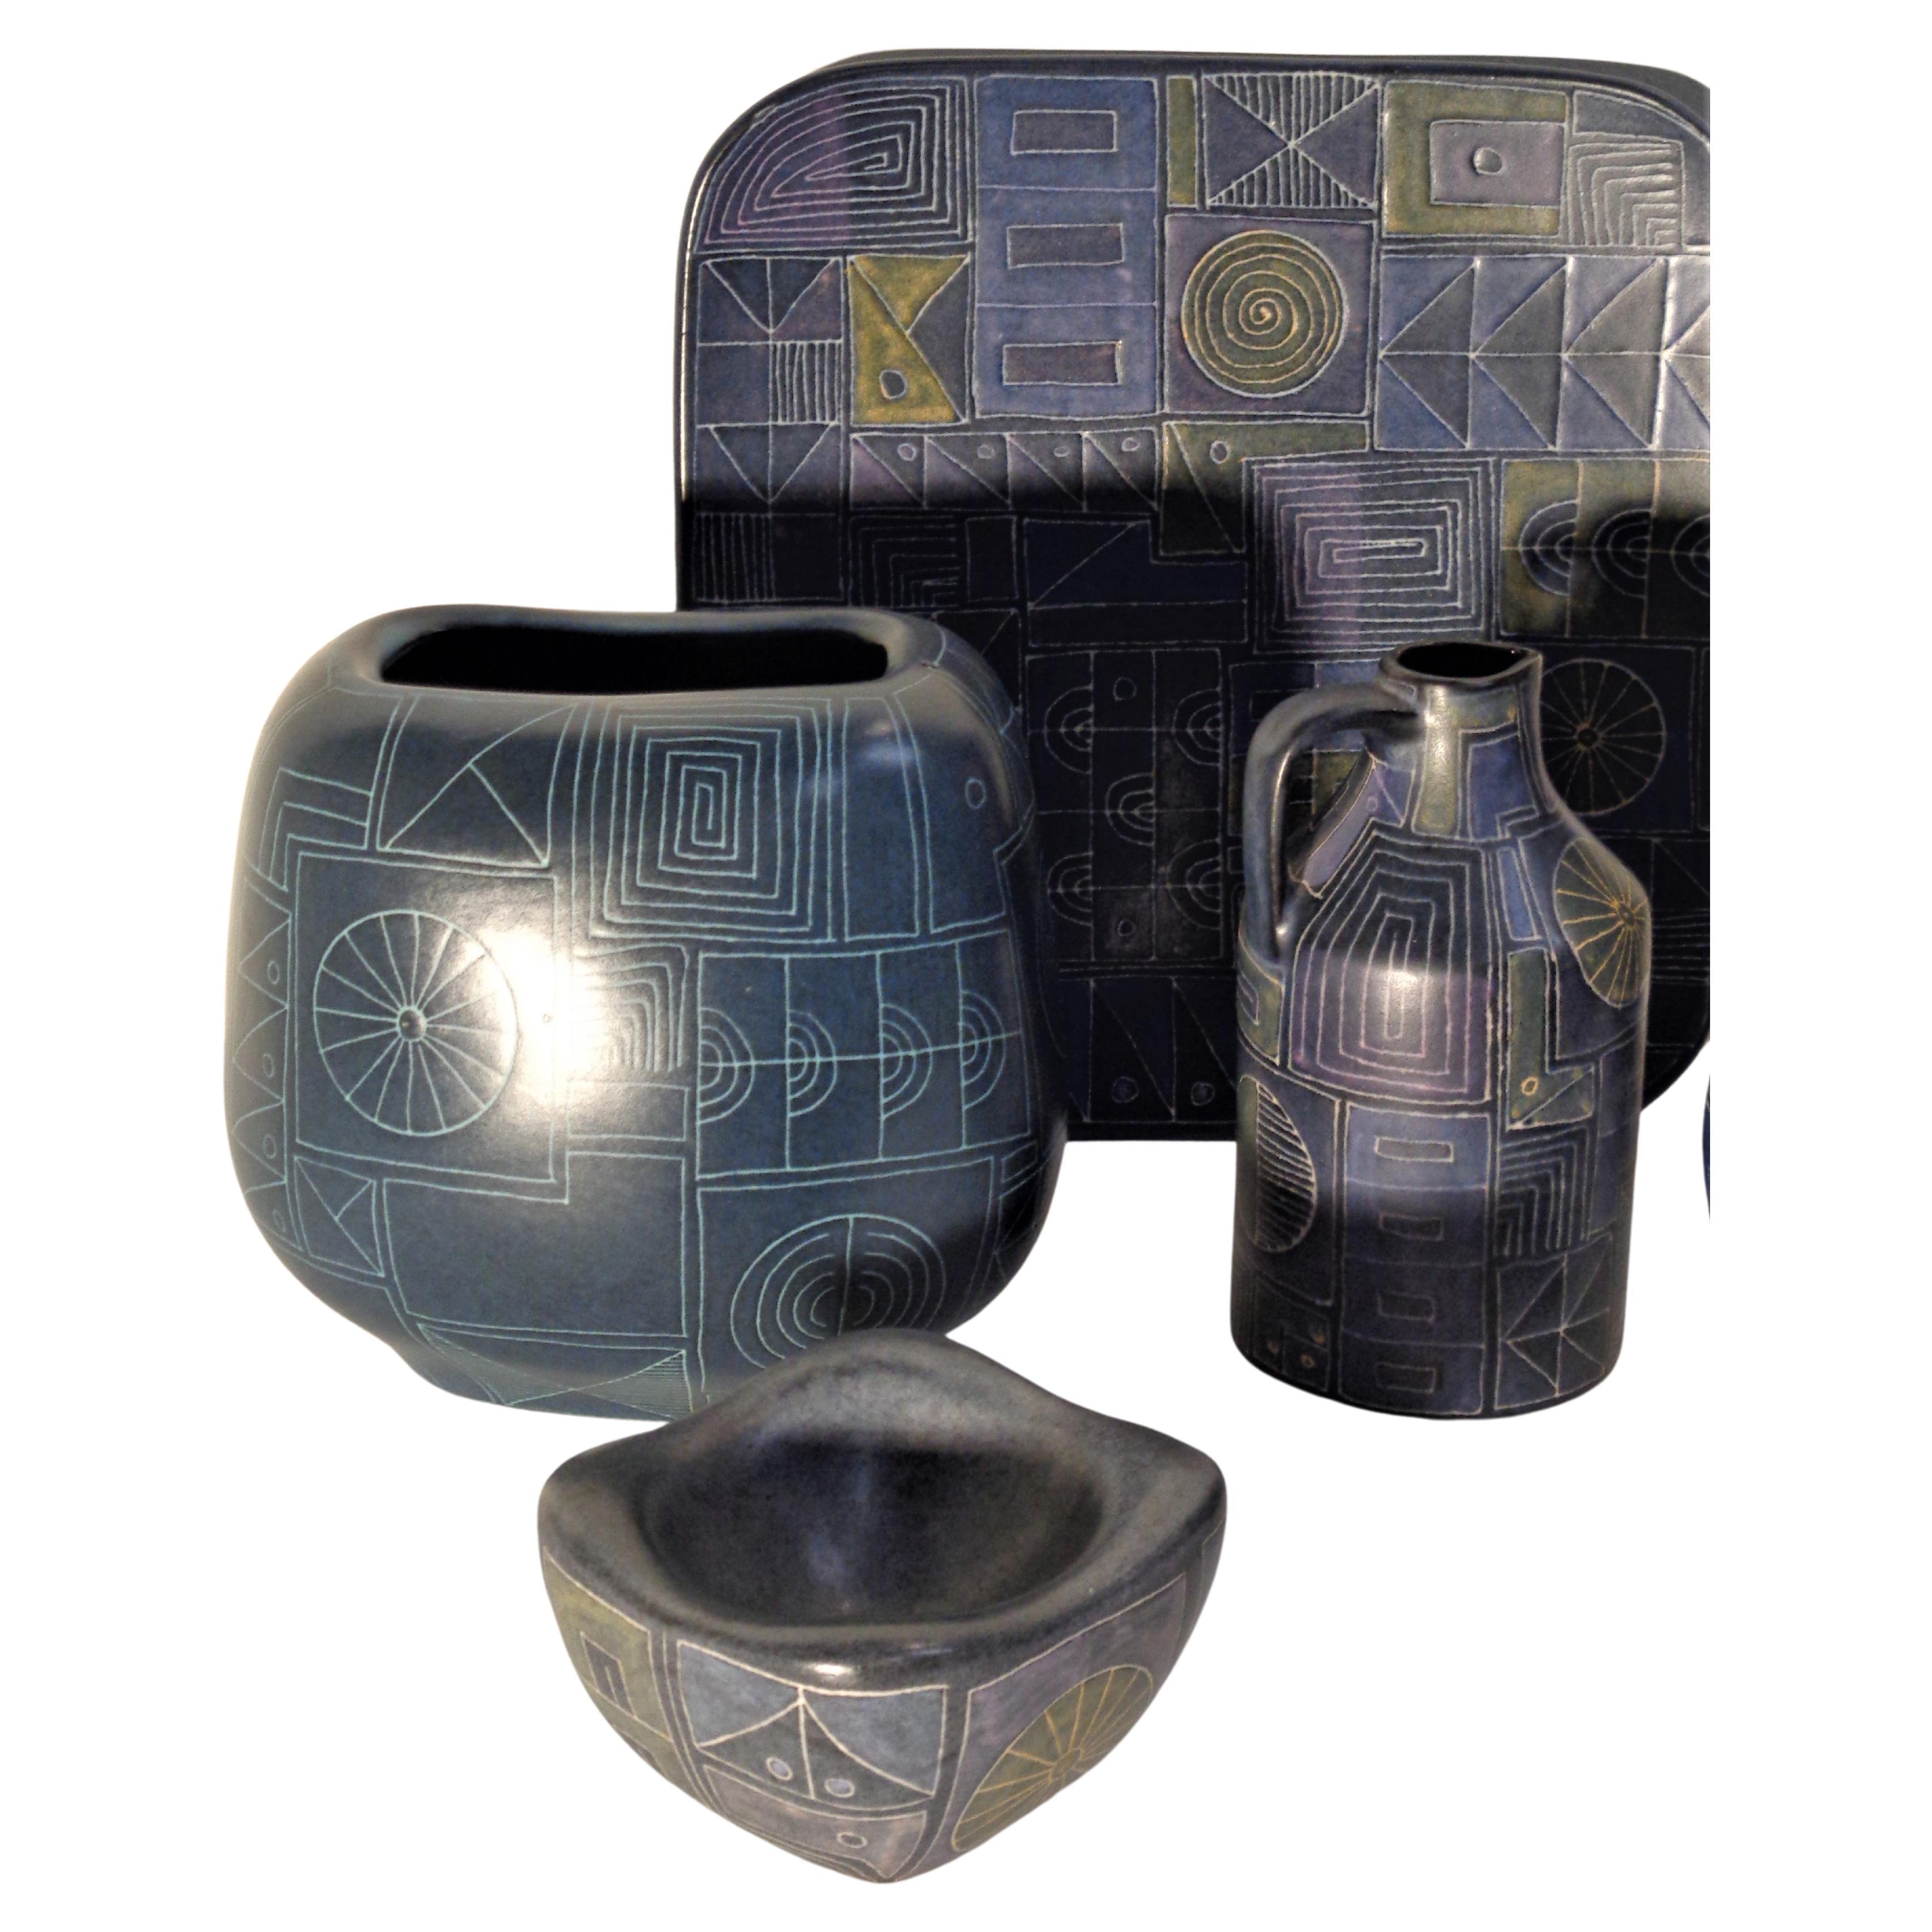 Fired  Lu Klopfer Geometric Sgrafitto Pottery Collection, Germany 1950's